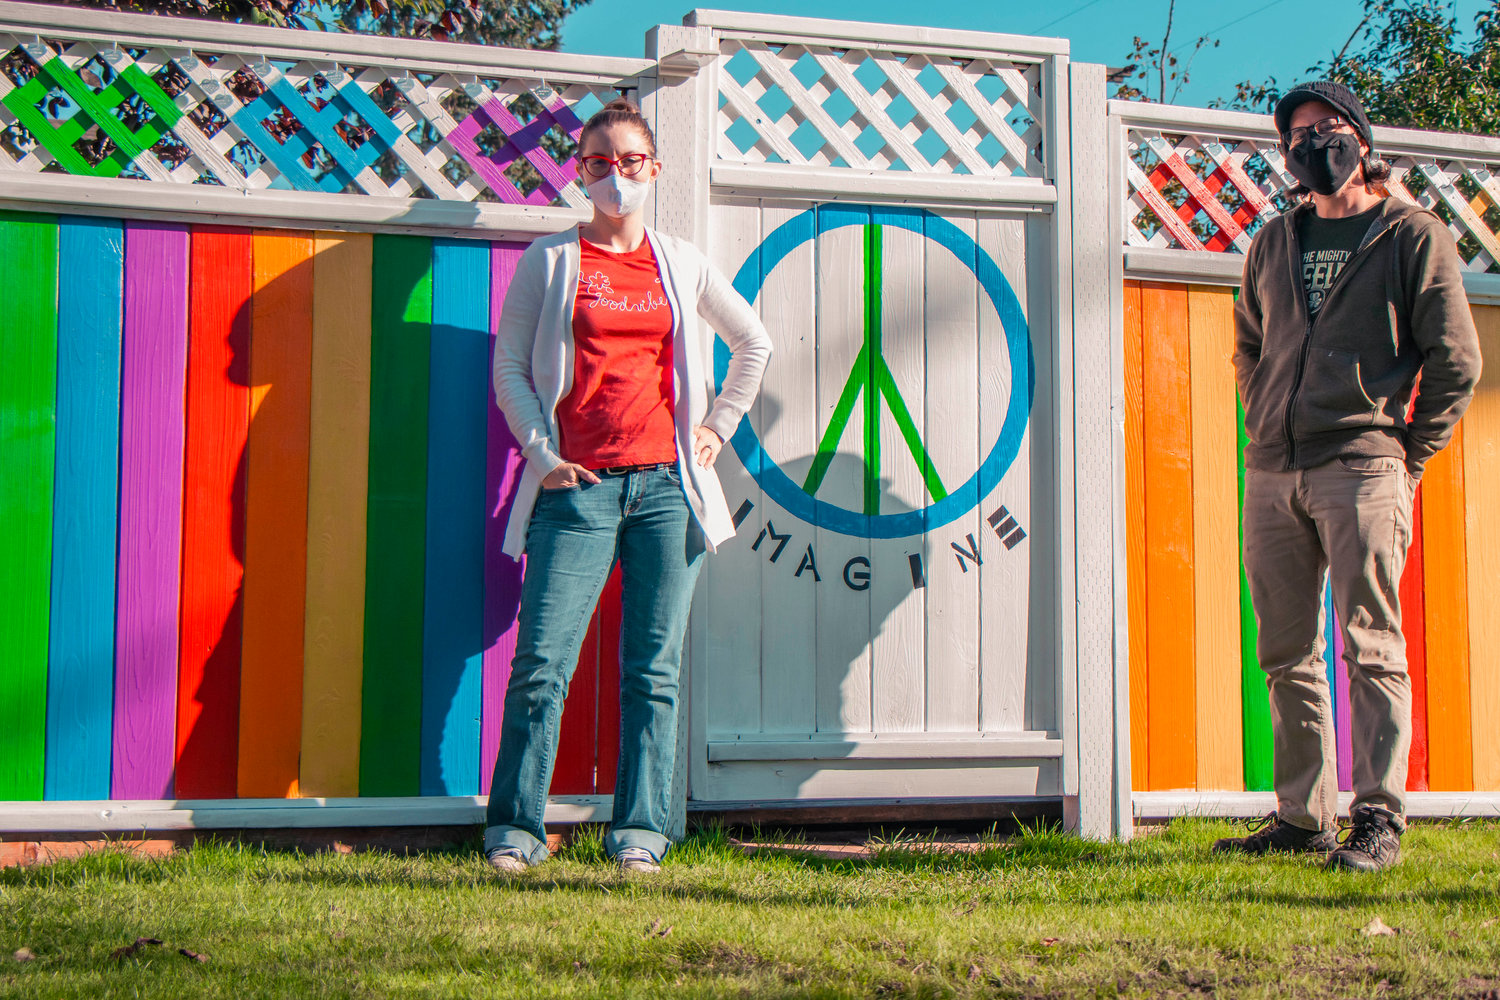 Jacky Vance and Kyle Wheeler pose for a photo in front of a rainbow painted fence in Chehalis on Monday.